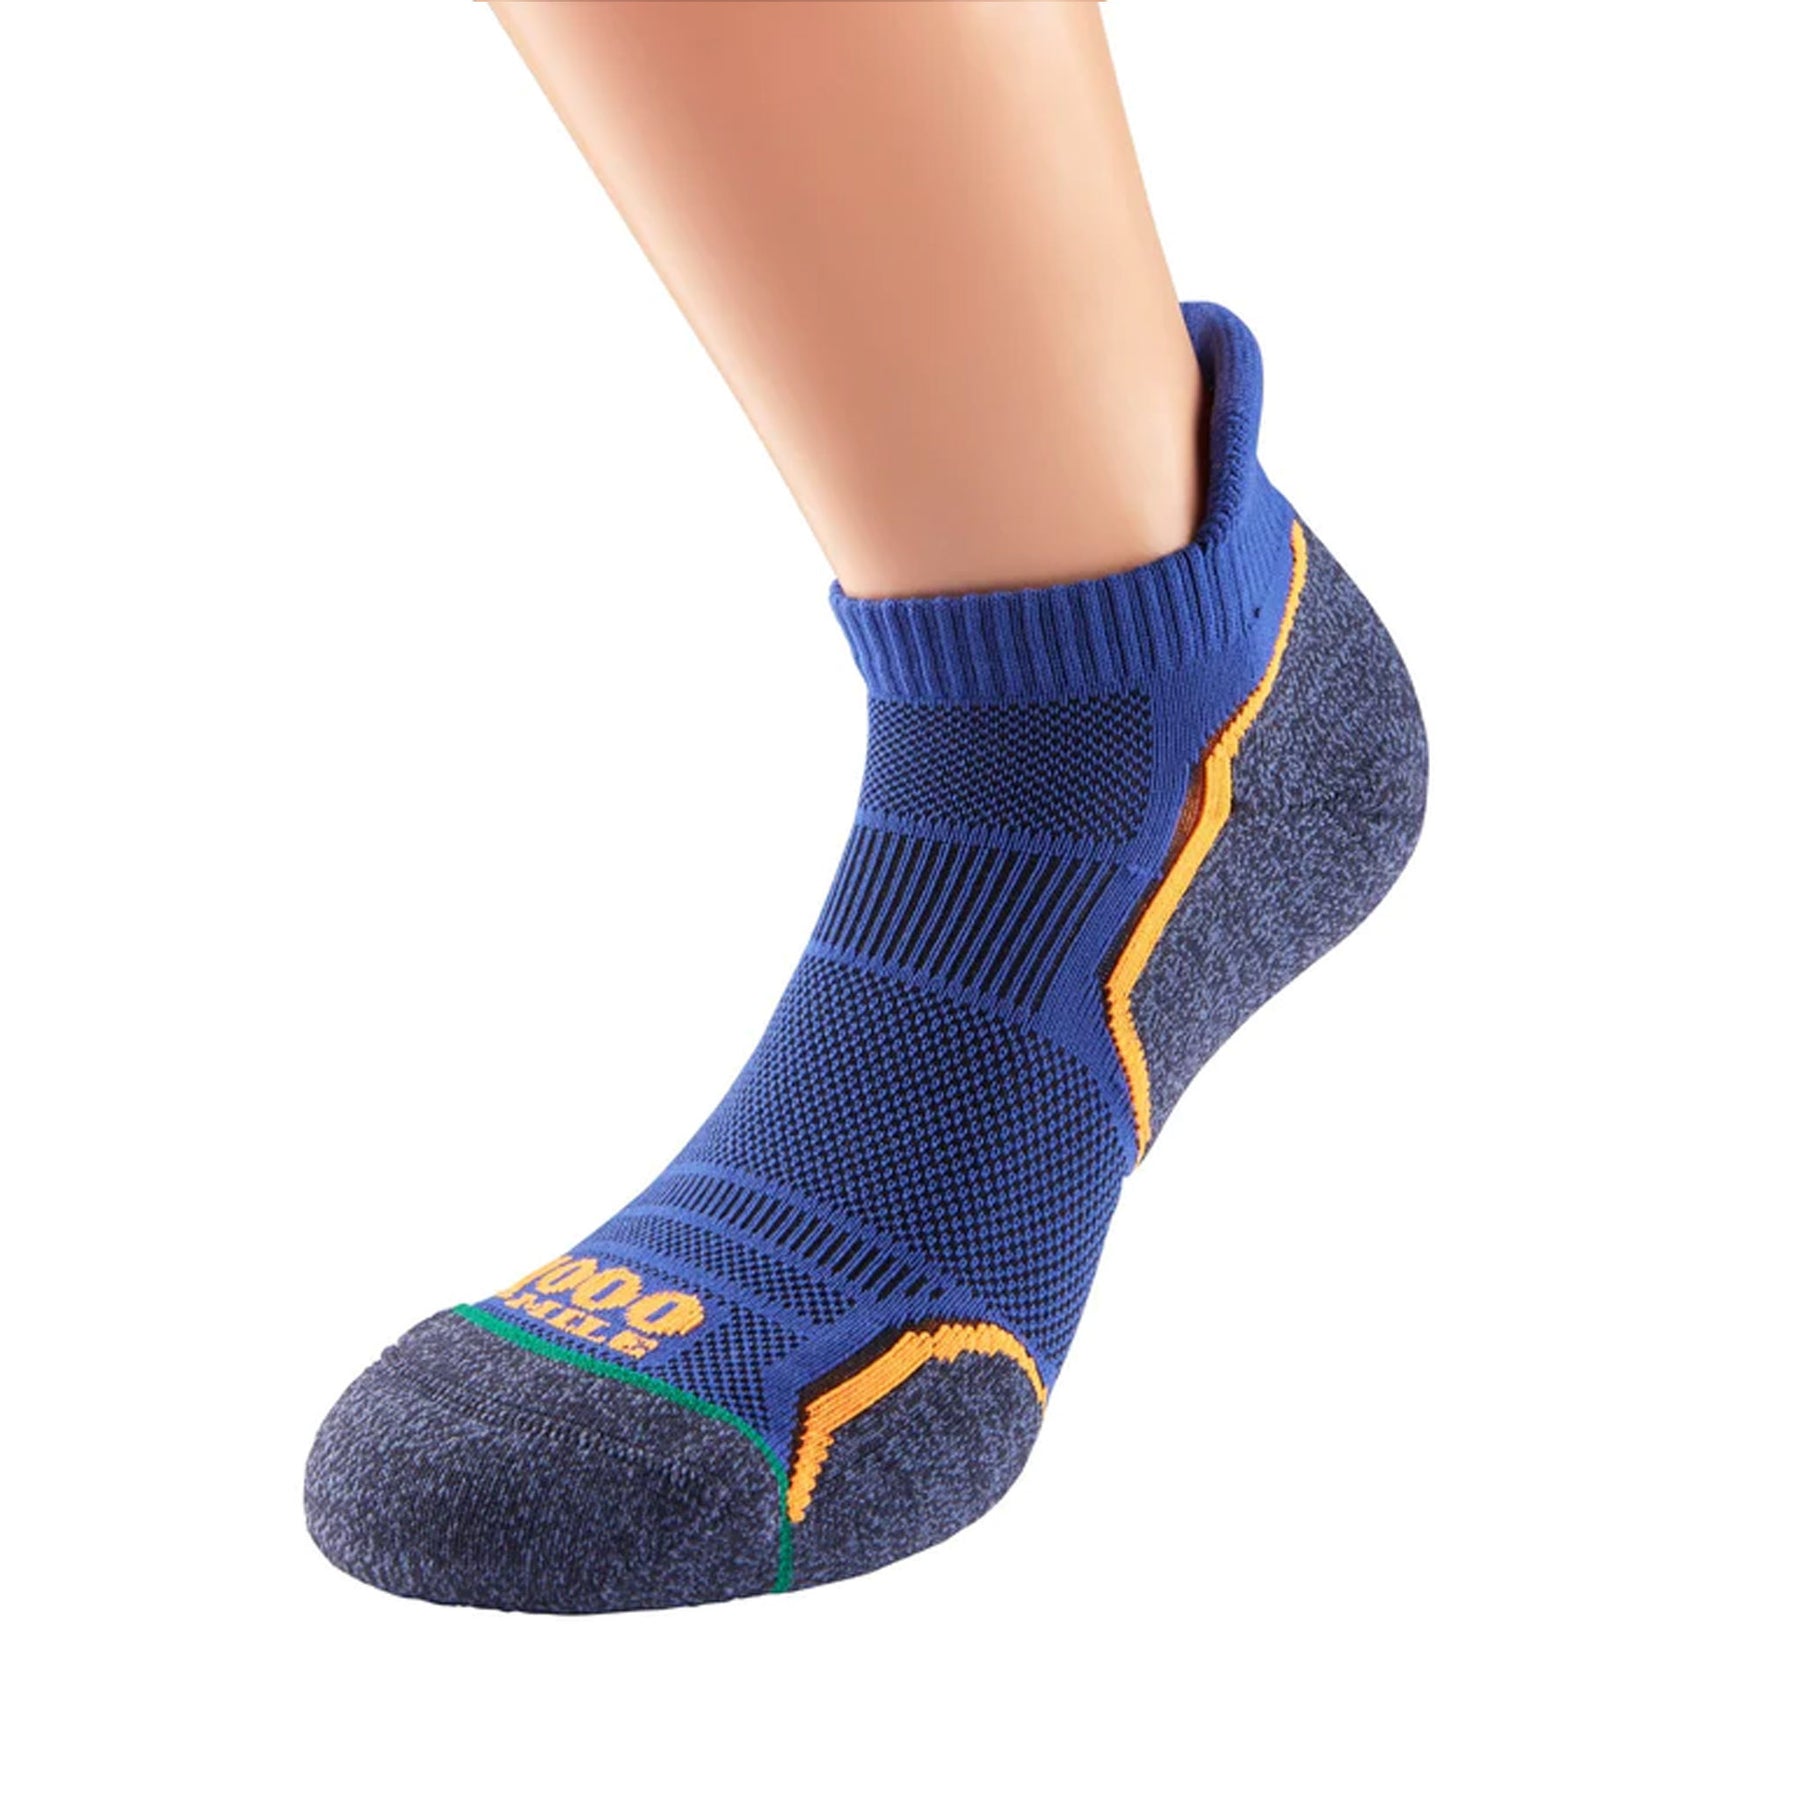 Thousand Mile Run Socklet Twinpack: Kingfisher/Navy